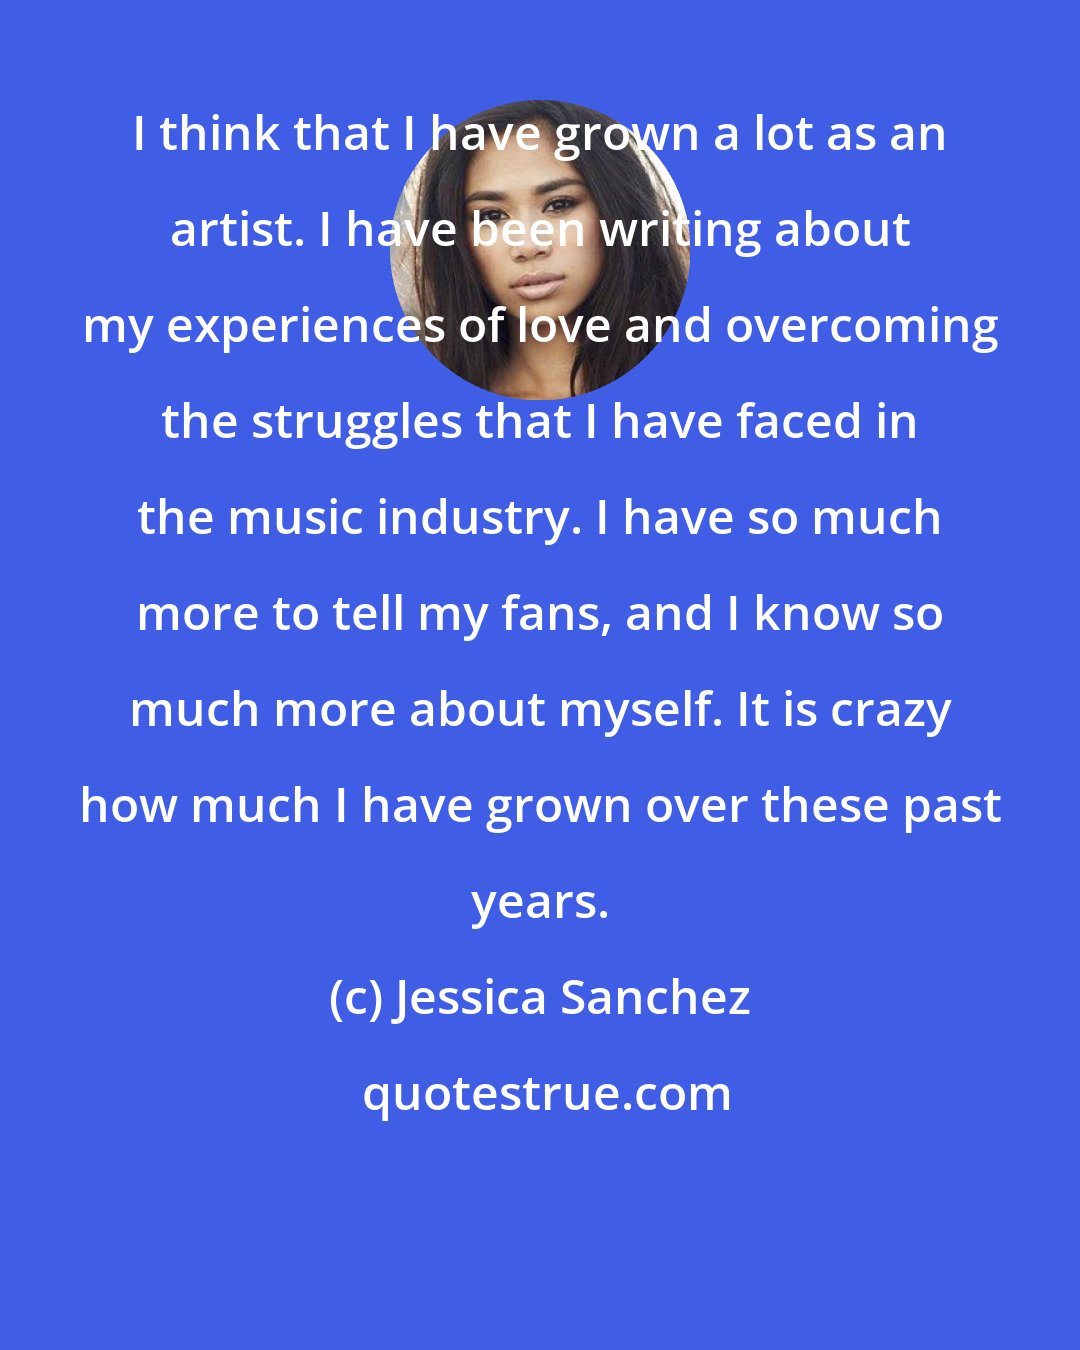 Jessica Sanchez: I think that I have grown a lot as an artist. I have been writing about my experiences of love and overcoming the struggles that I have faced in the music industry. I have so much more to tell my fans, and I know so much more about myself. It is crazy how much I have grown over these past years.